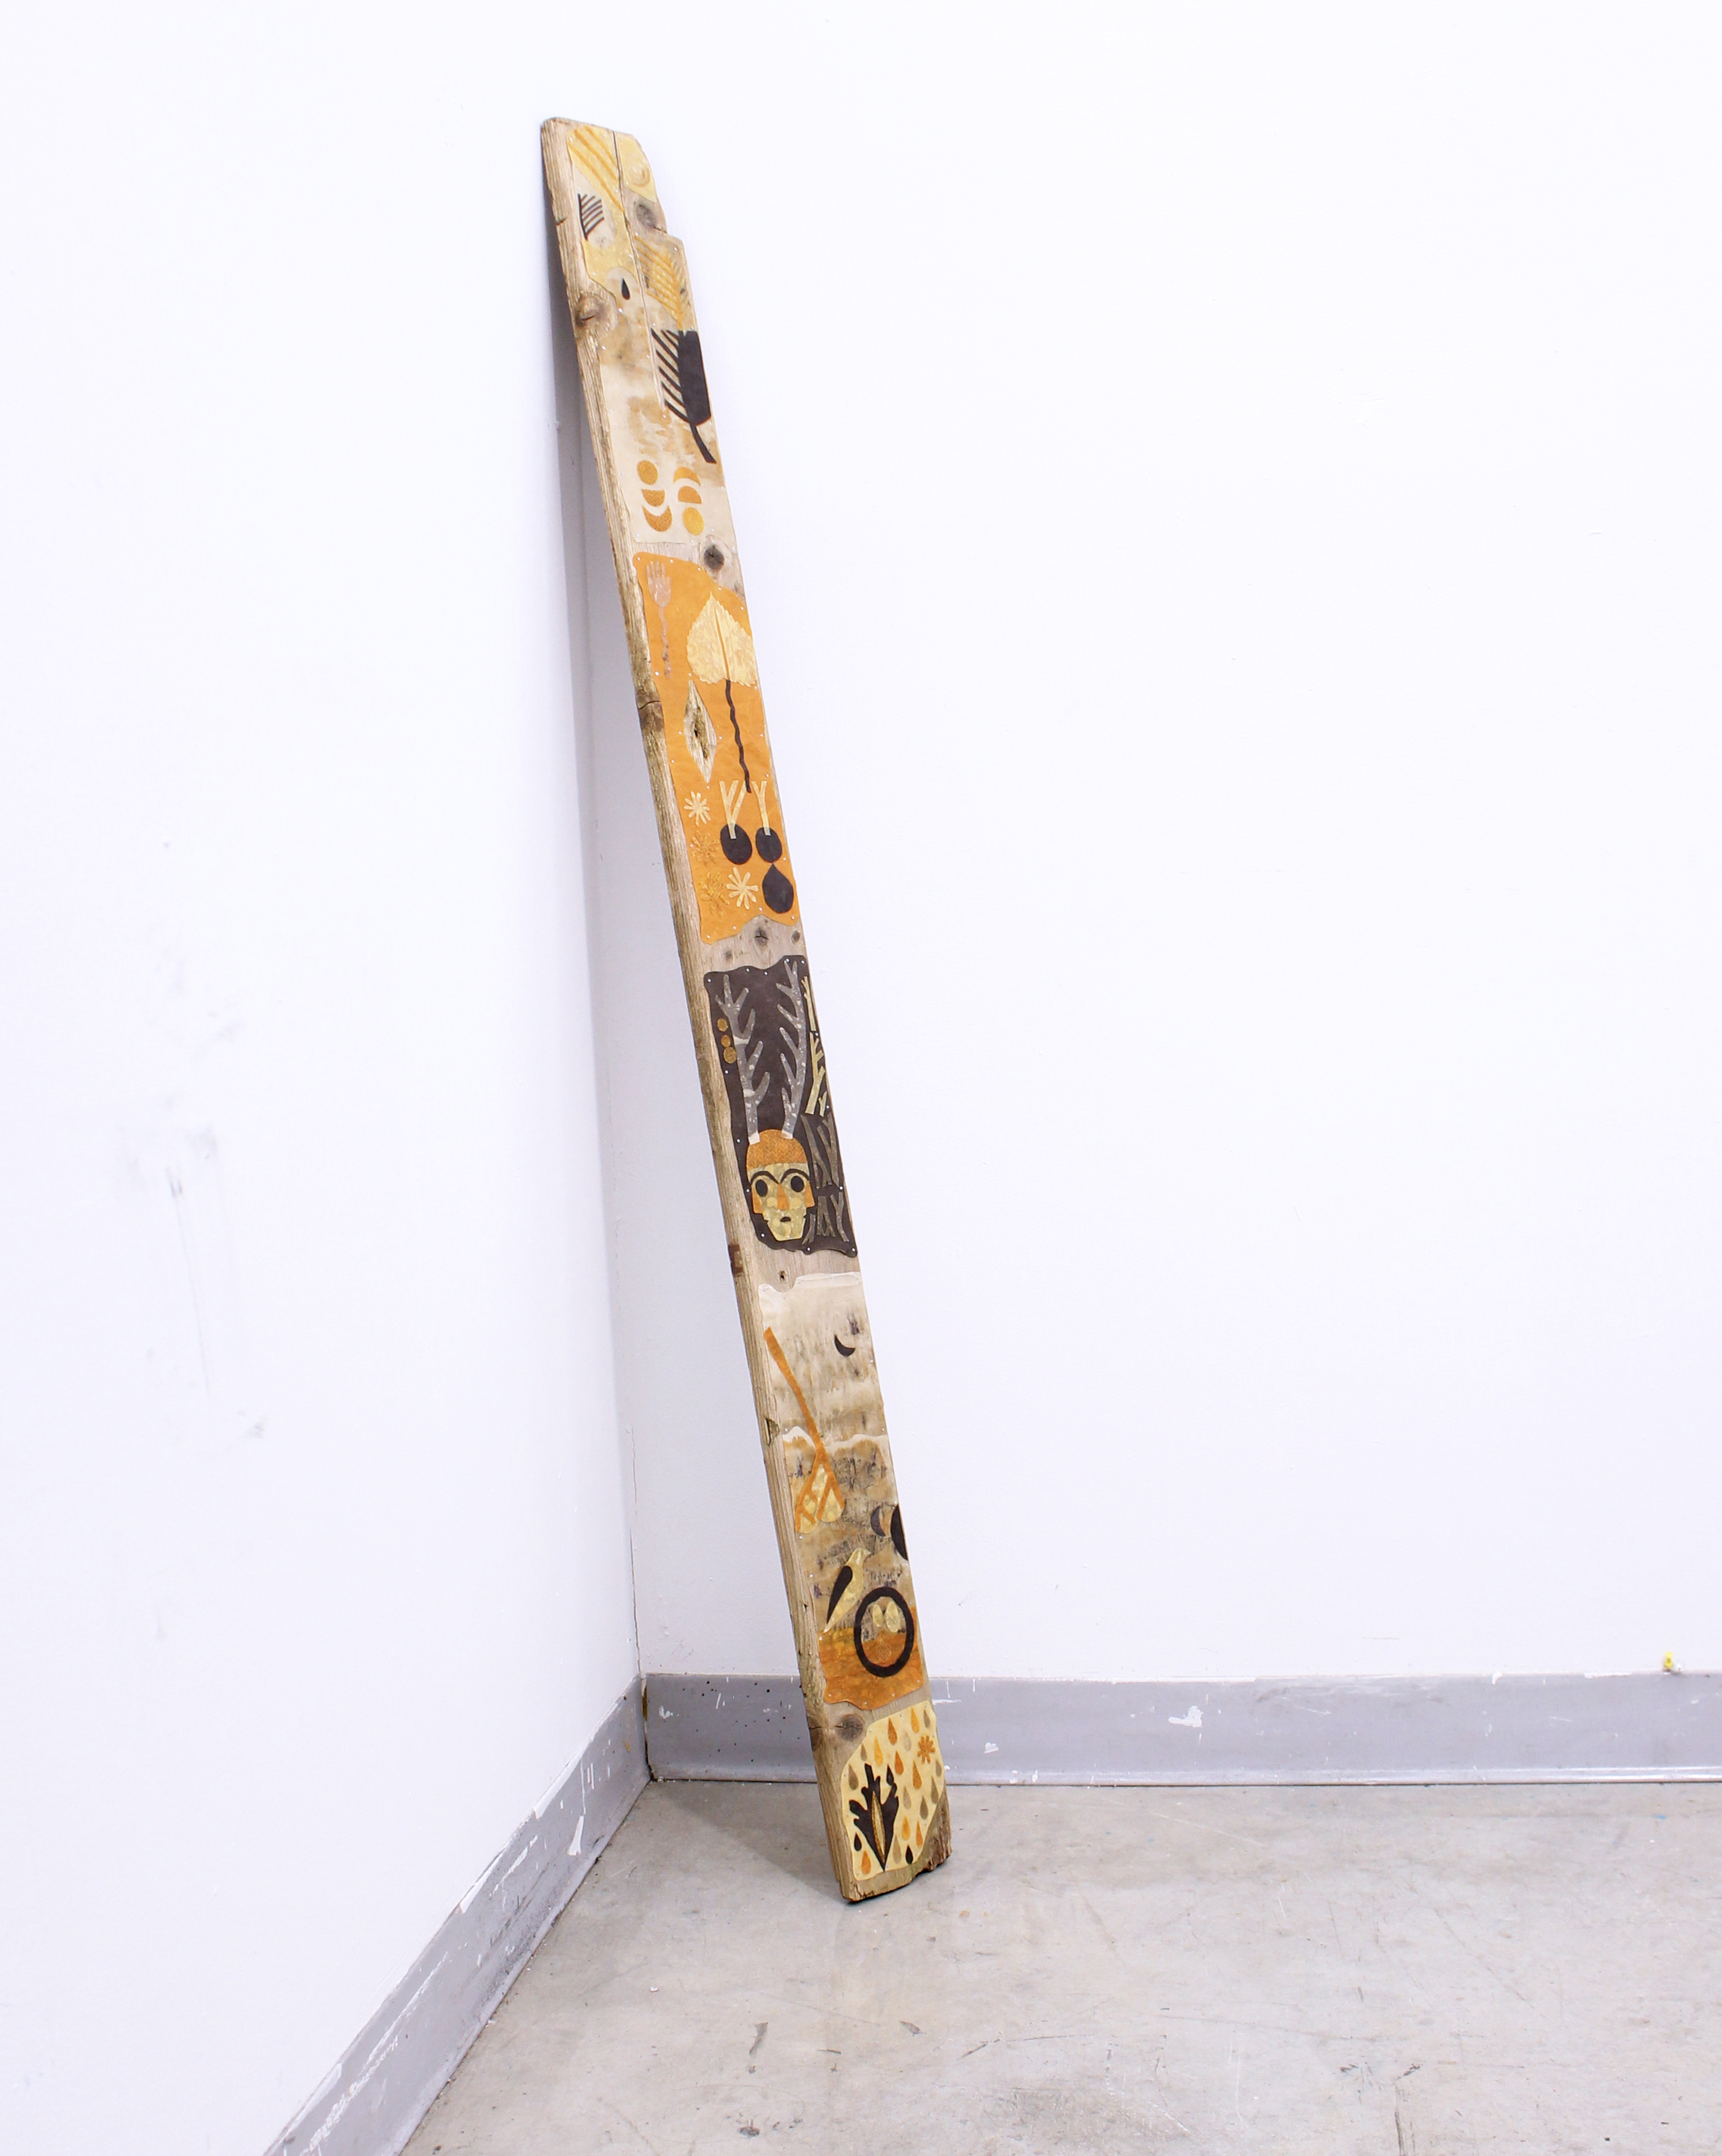 Plank of wood leaning against a white wall painted with yellow and brown organic shapes.